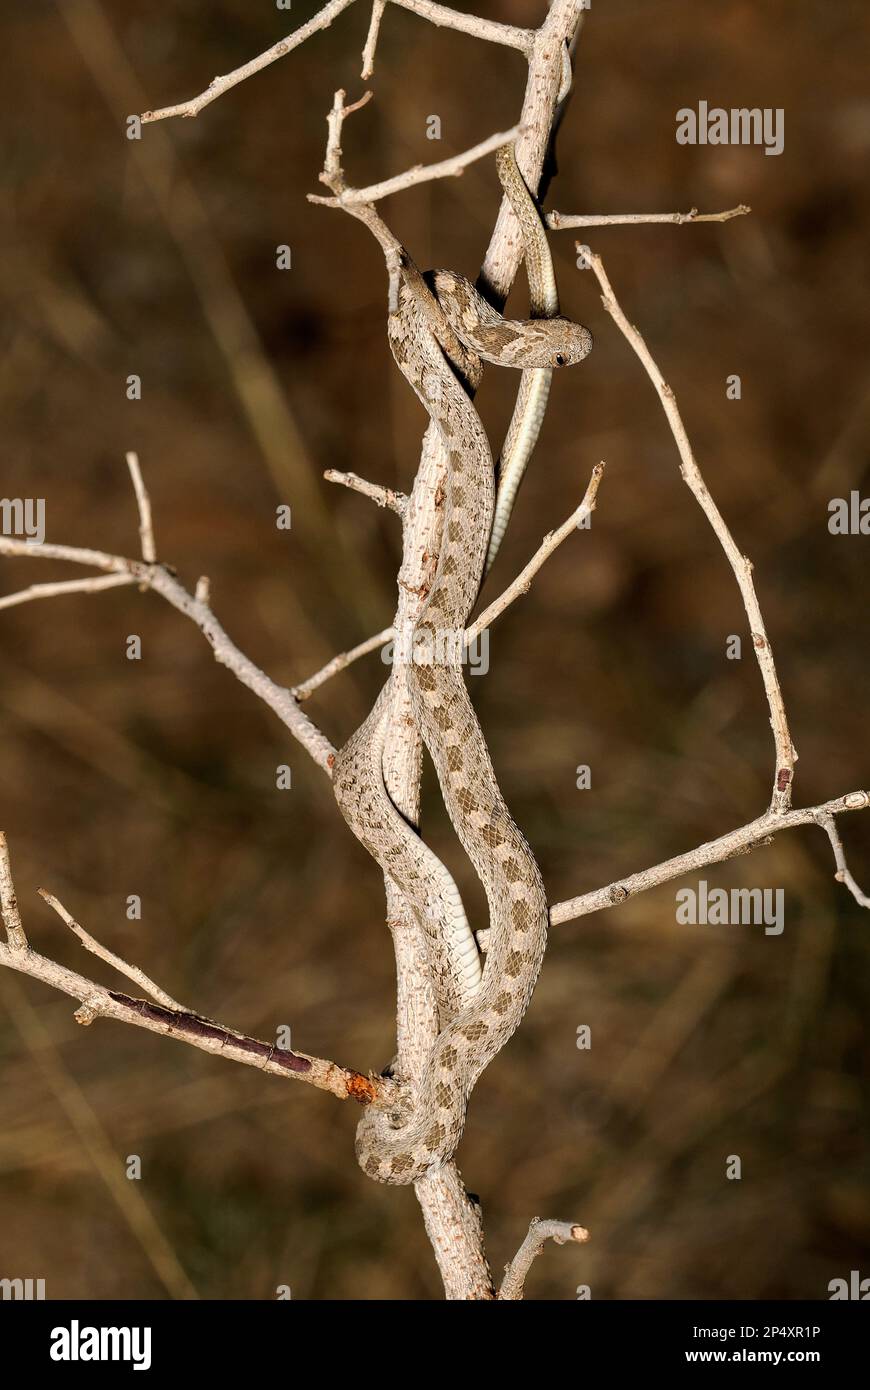 Common Egg Eater Snake (Dasypeltis scabra) climbing along a twig, Windhoek, Namibia, January Stock Photo